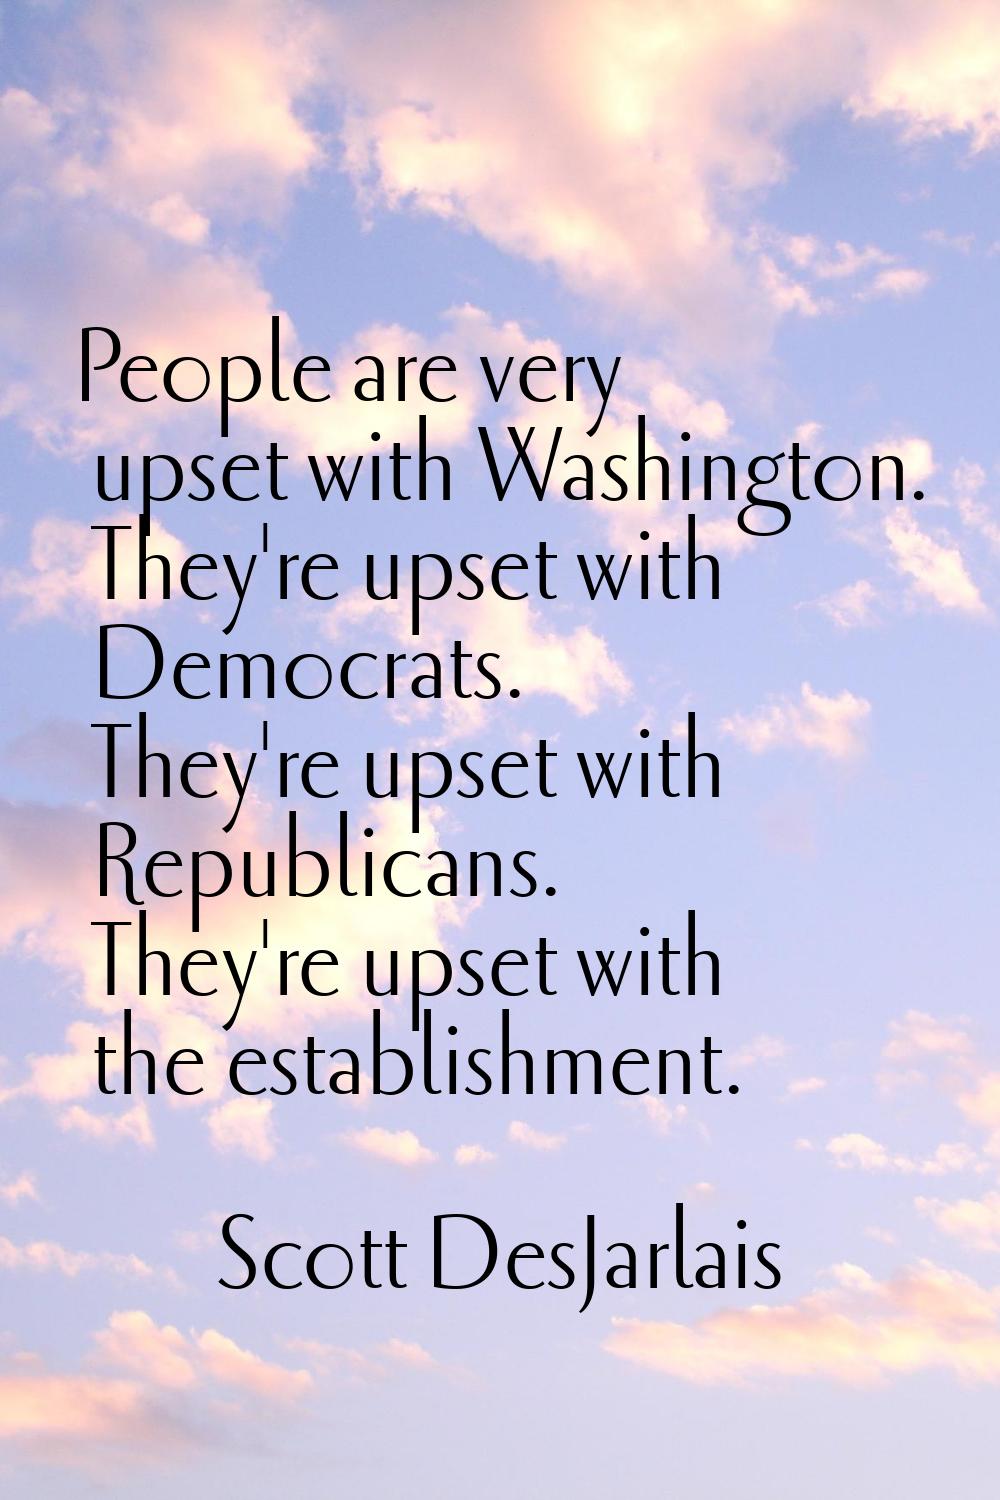 People are very upset with Washington. They're upset with Democrats. They're upset with Republicans